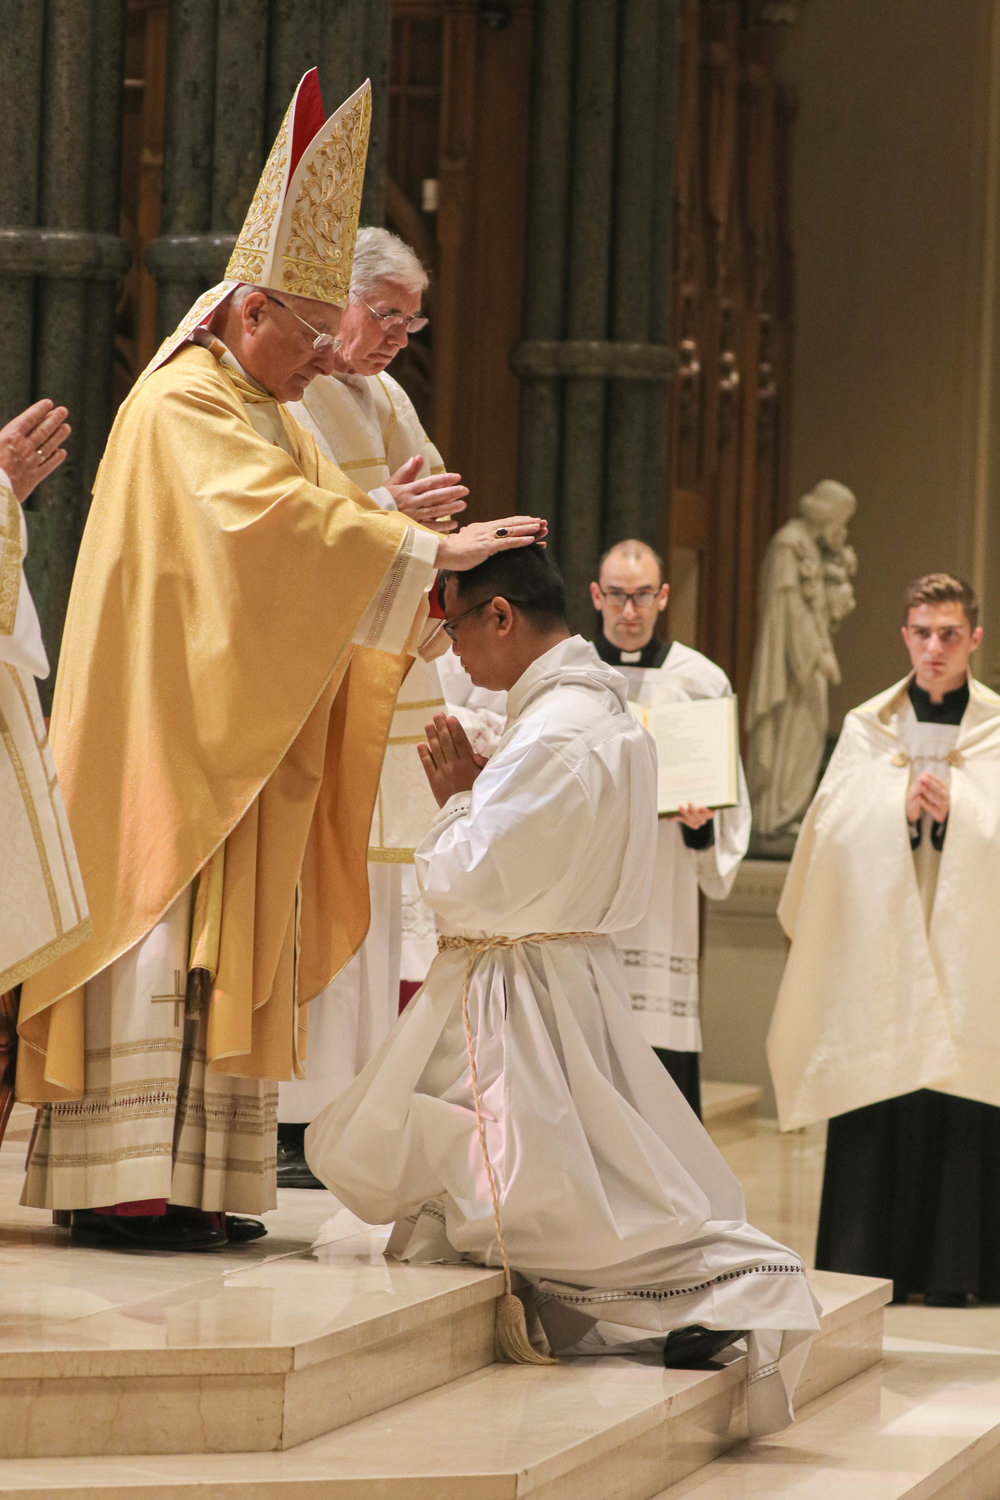 Rev. Mr. Daniel M. Mahoney and Rev. Mr. Doan V. Nguyen are ordained to the Sacred Order of Deacon through the imposition of hands and the invocation of the Holy Spirit, by Auxiliary Bishop Robert C. Evans on Saturday, Sept. 26 at the Cathedral of Saints Peter and Paul, Providence.